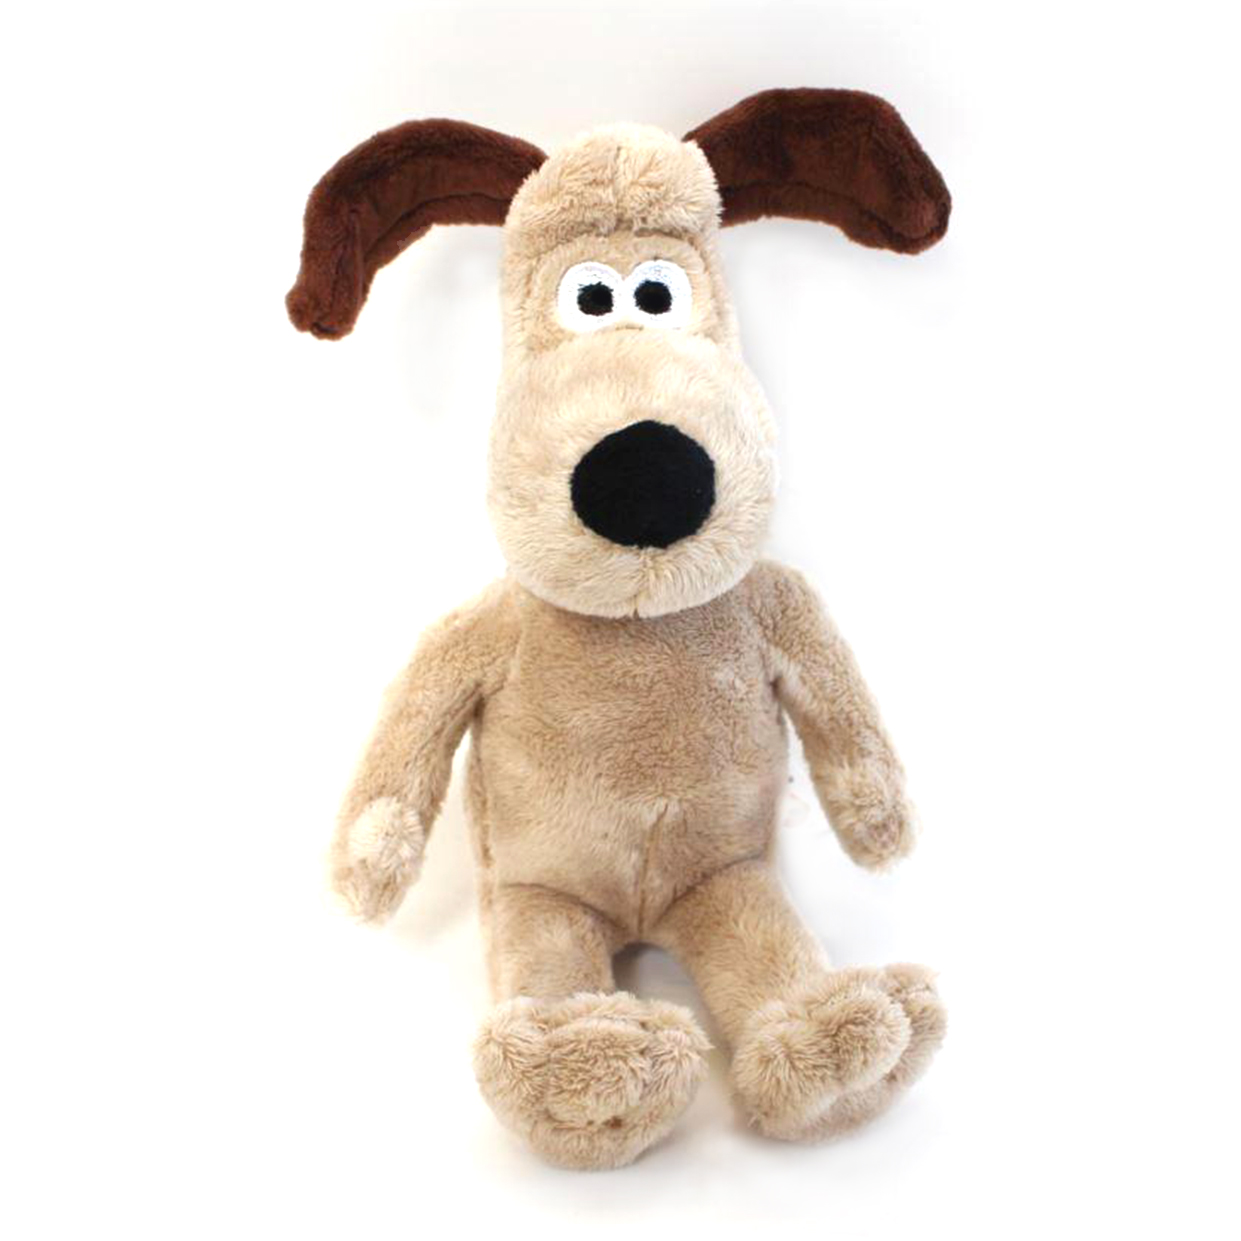 Gromit Soft Toy - sent on February 2nd, 2022